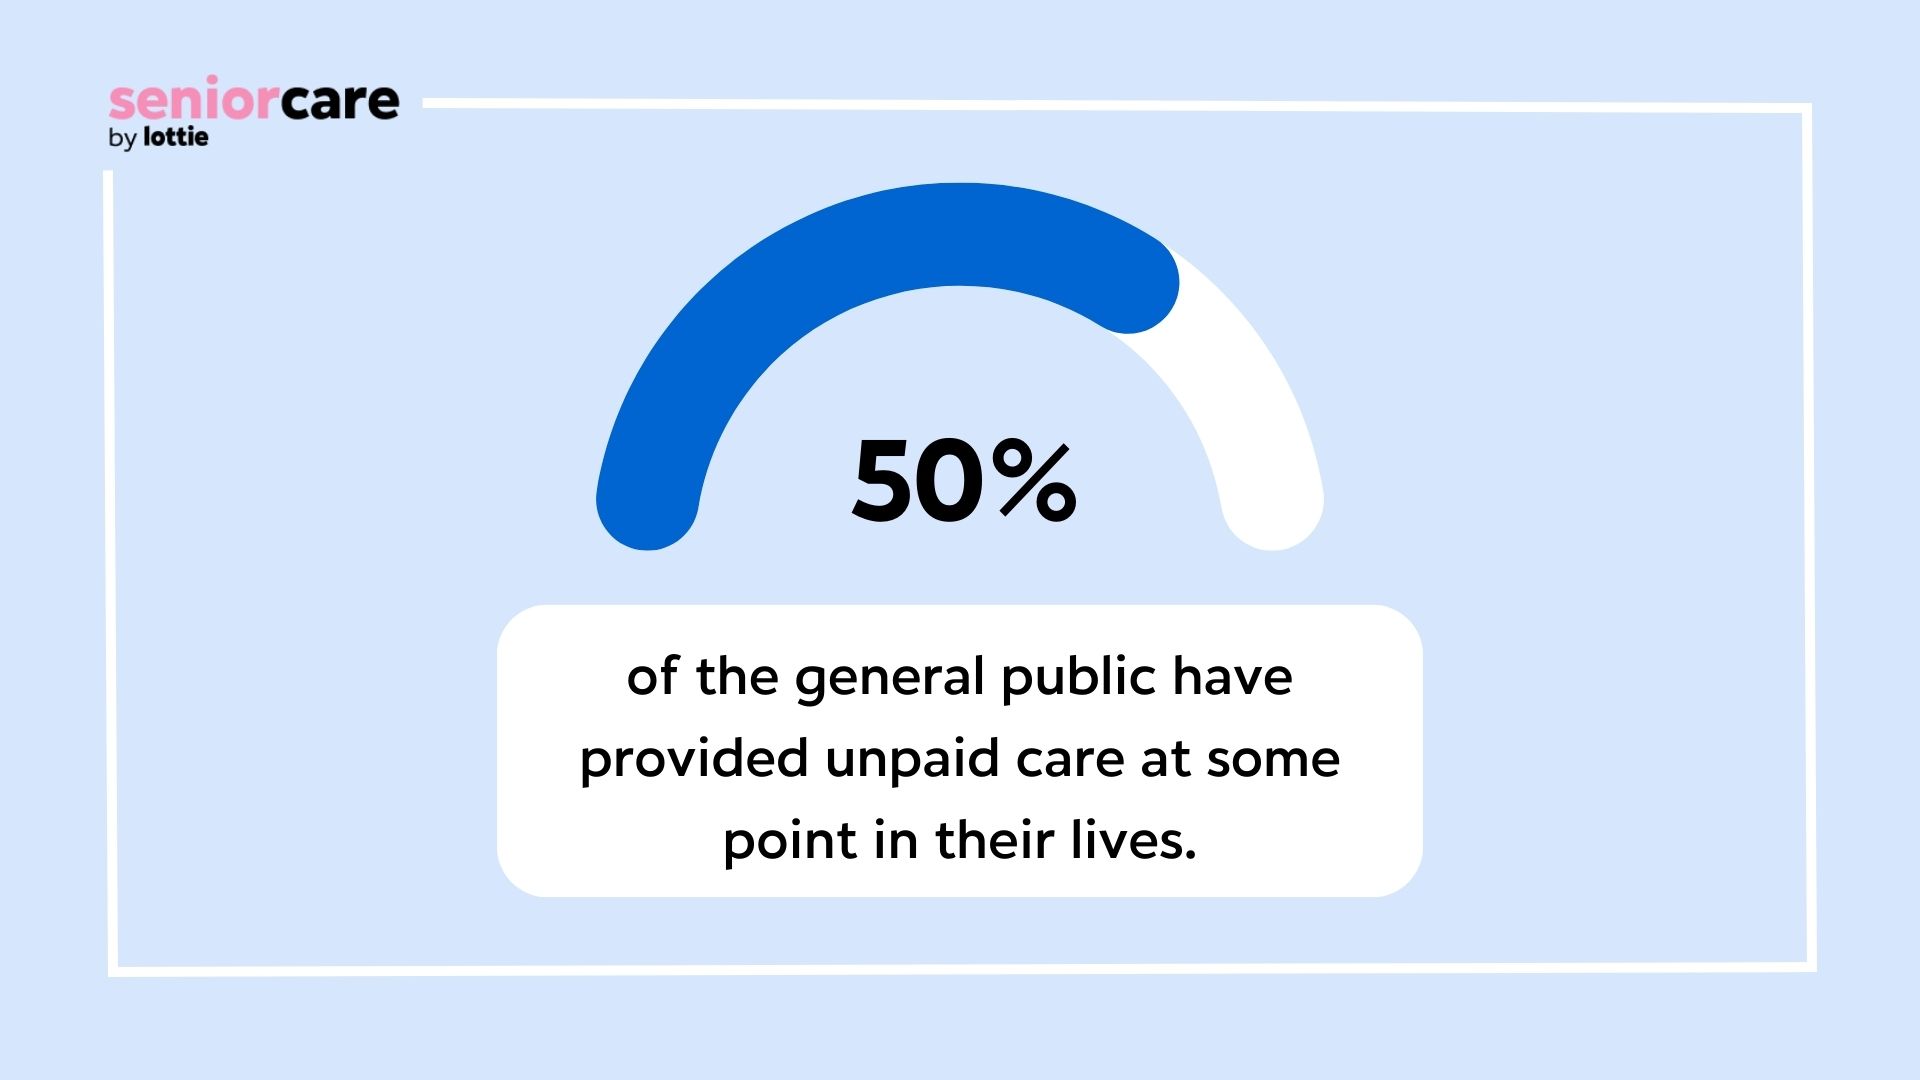 image showing 50% of the public have provided unpaid care at some point in their lives